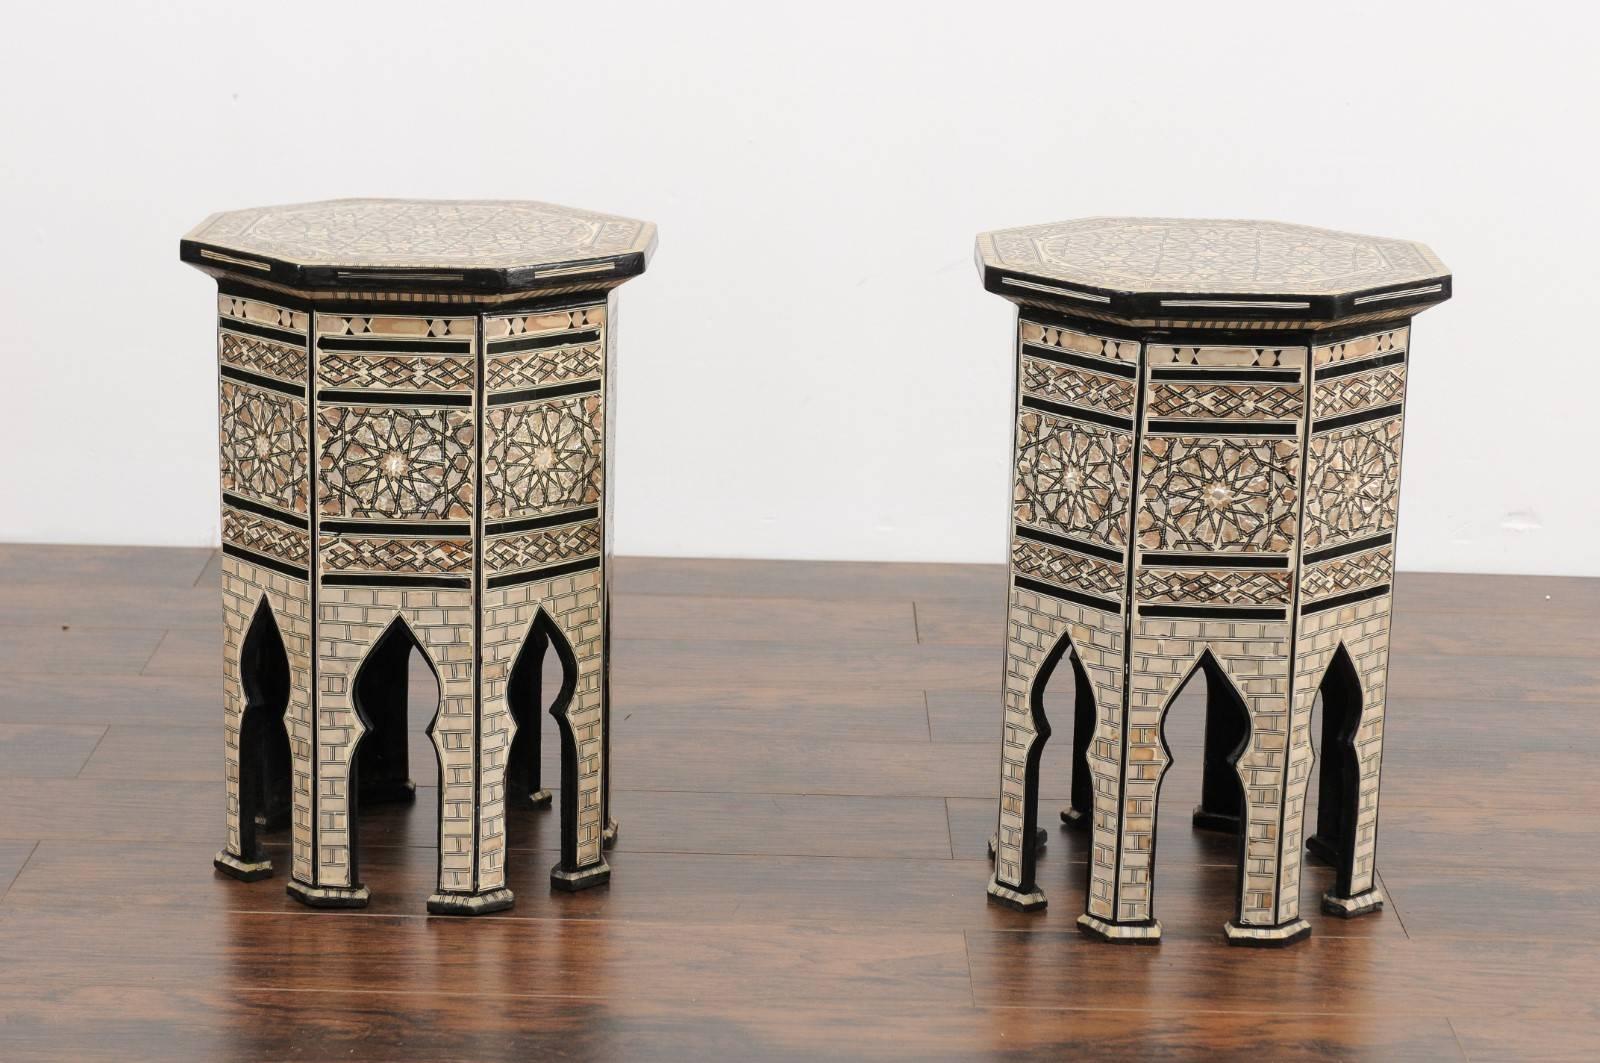 A pair of Syrian Moorish style octagonal side tables with ebonized wood and mother-of-pearl inlay from the early 20th century. Each of this pair of Syrian tables features an exquisite décor, where no area is left untouched, evoking something that is